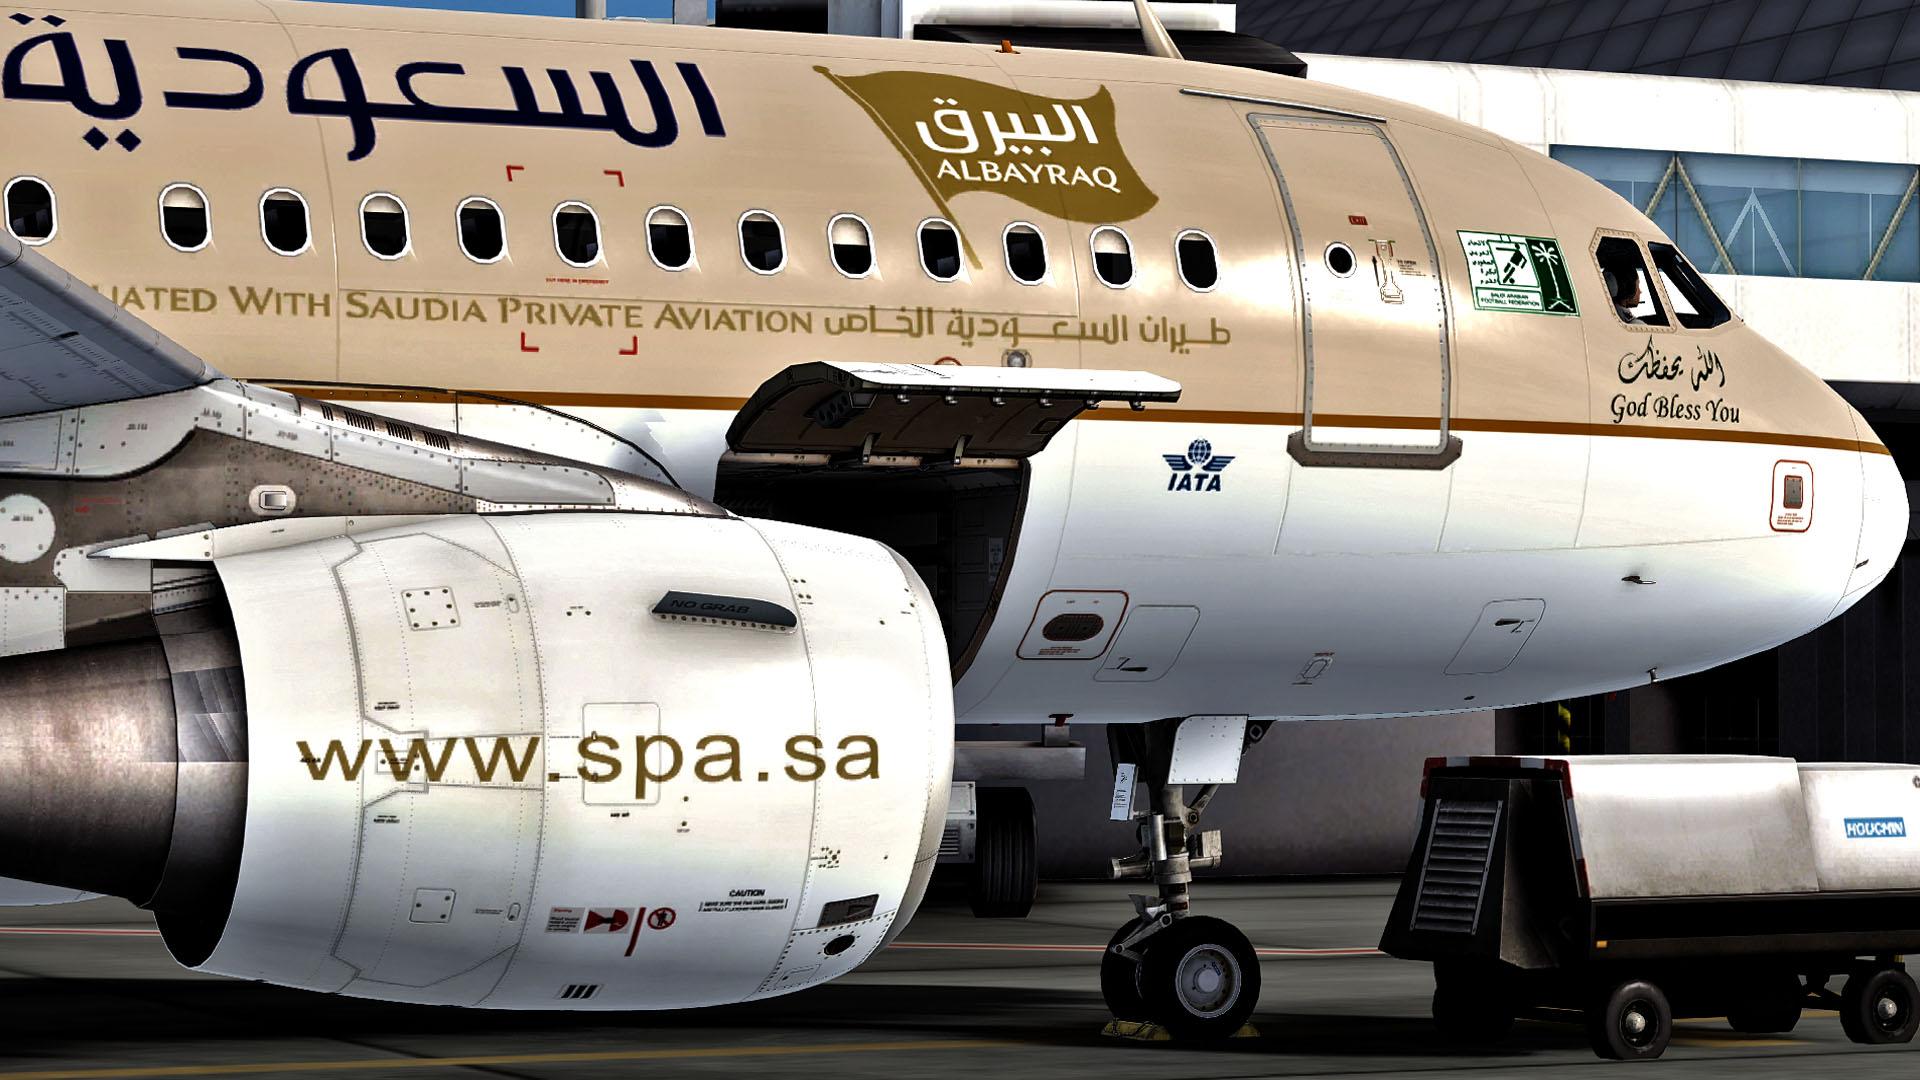 More information about "Saudi Airlines "Private Aviation" D-APTA Airbus A319-112"